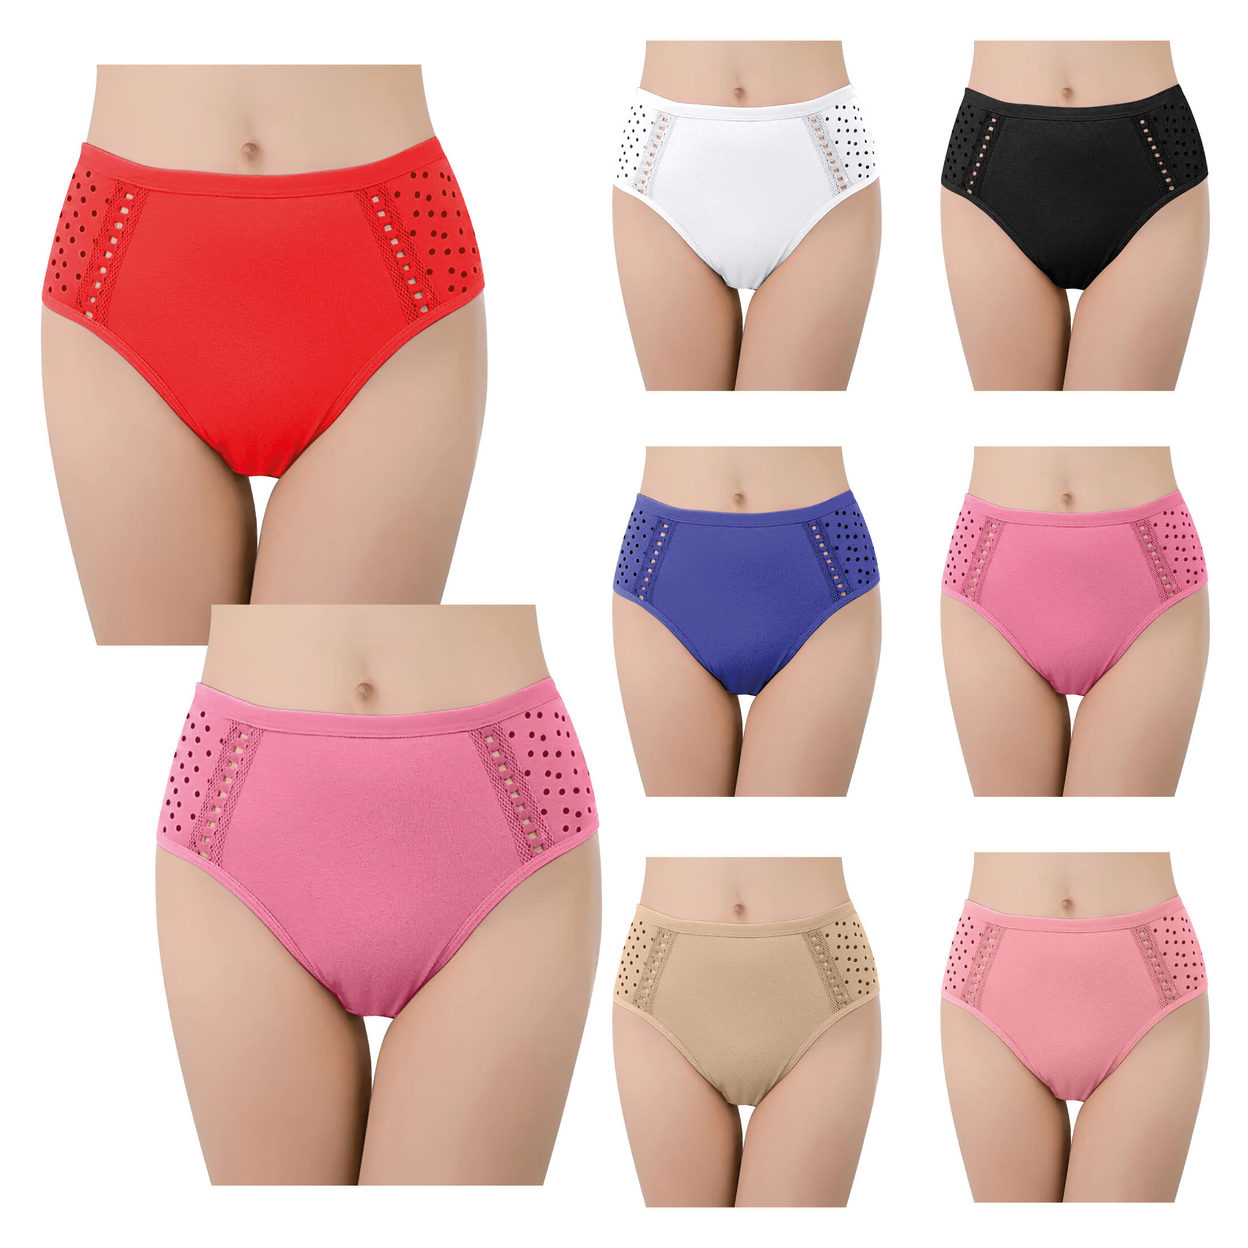 5-Pack: Women's Ultra Soft Moisture Wicking Panties Cotton Perfect Fit Underwear (Plus Sizes Available) - Xx-large